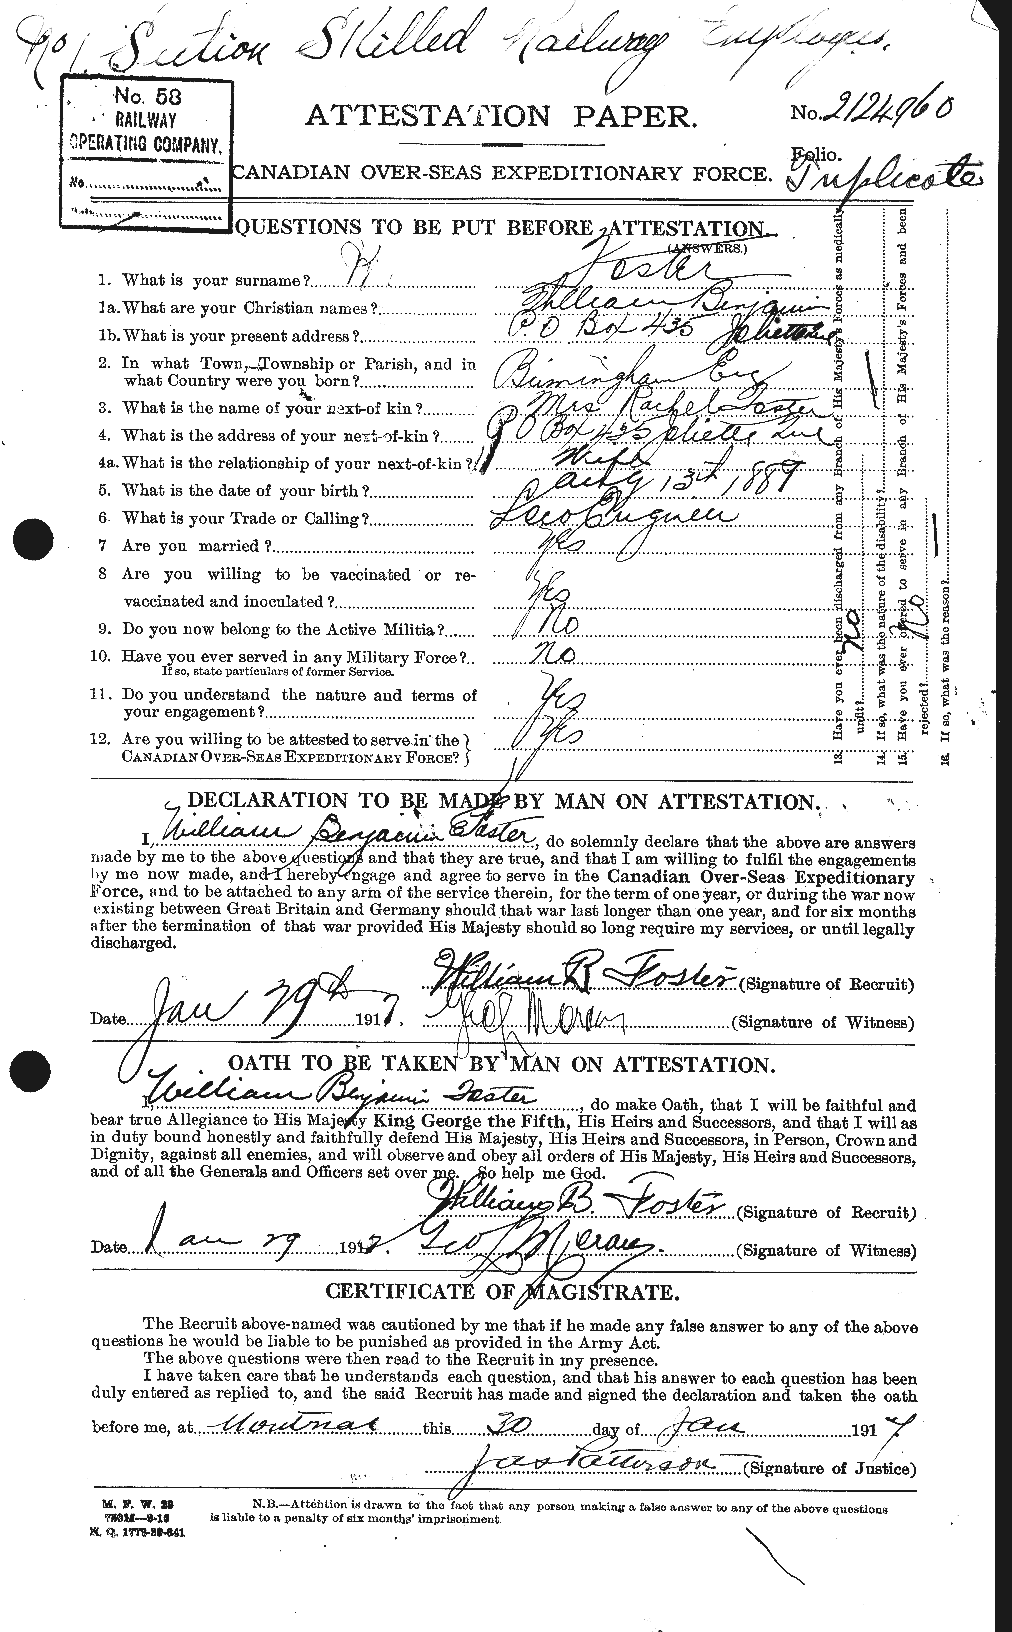 Personnel Records of the First World War - CEF 328729a